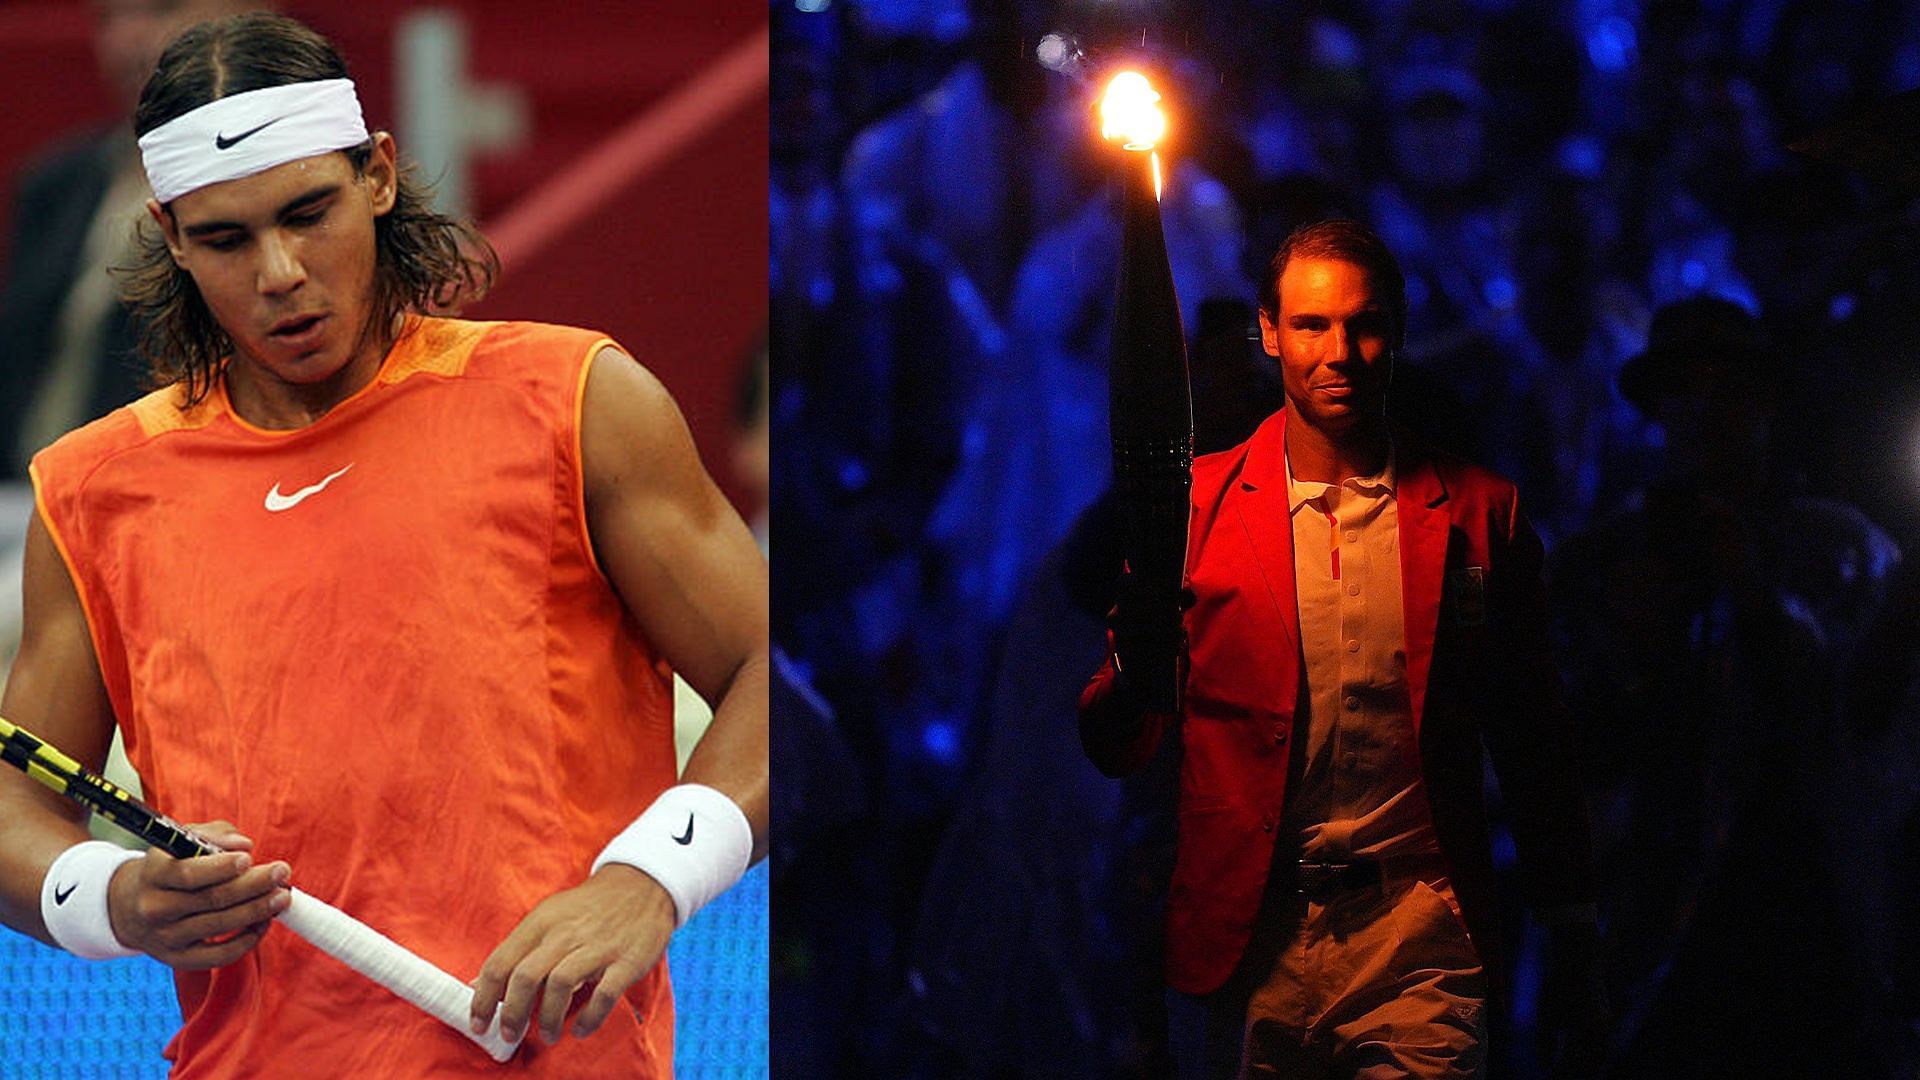 Rafael Nadal's journey in Paris: from being booed at French Open in 2005 to raising the Olympic Flame in 2024